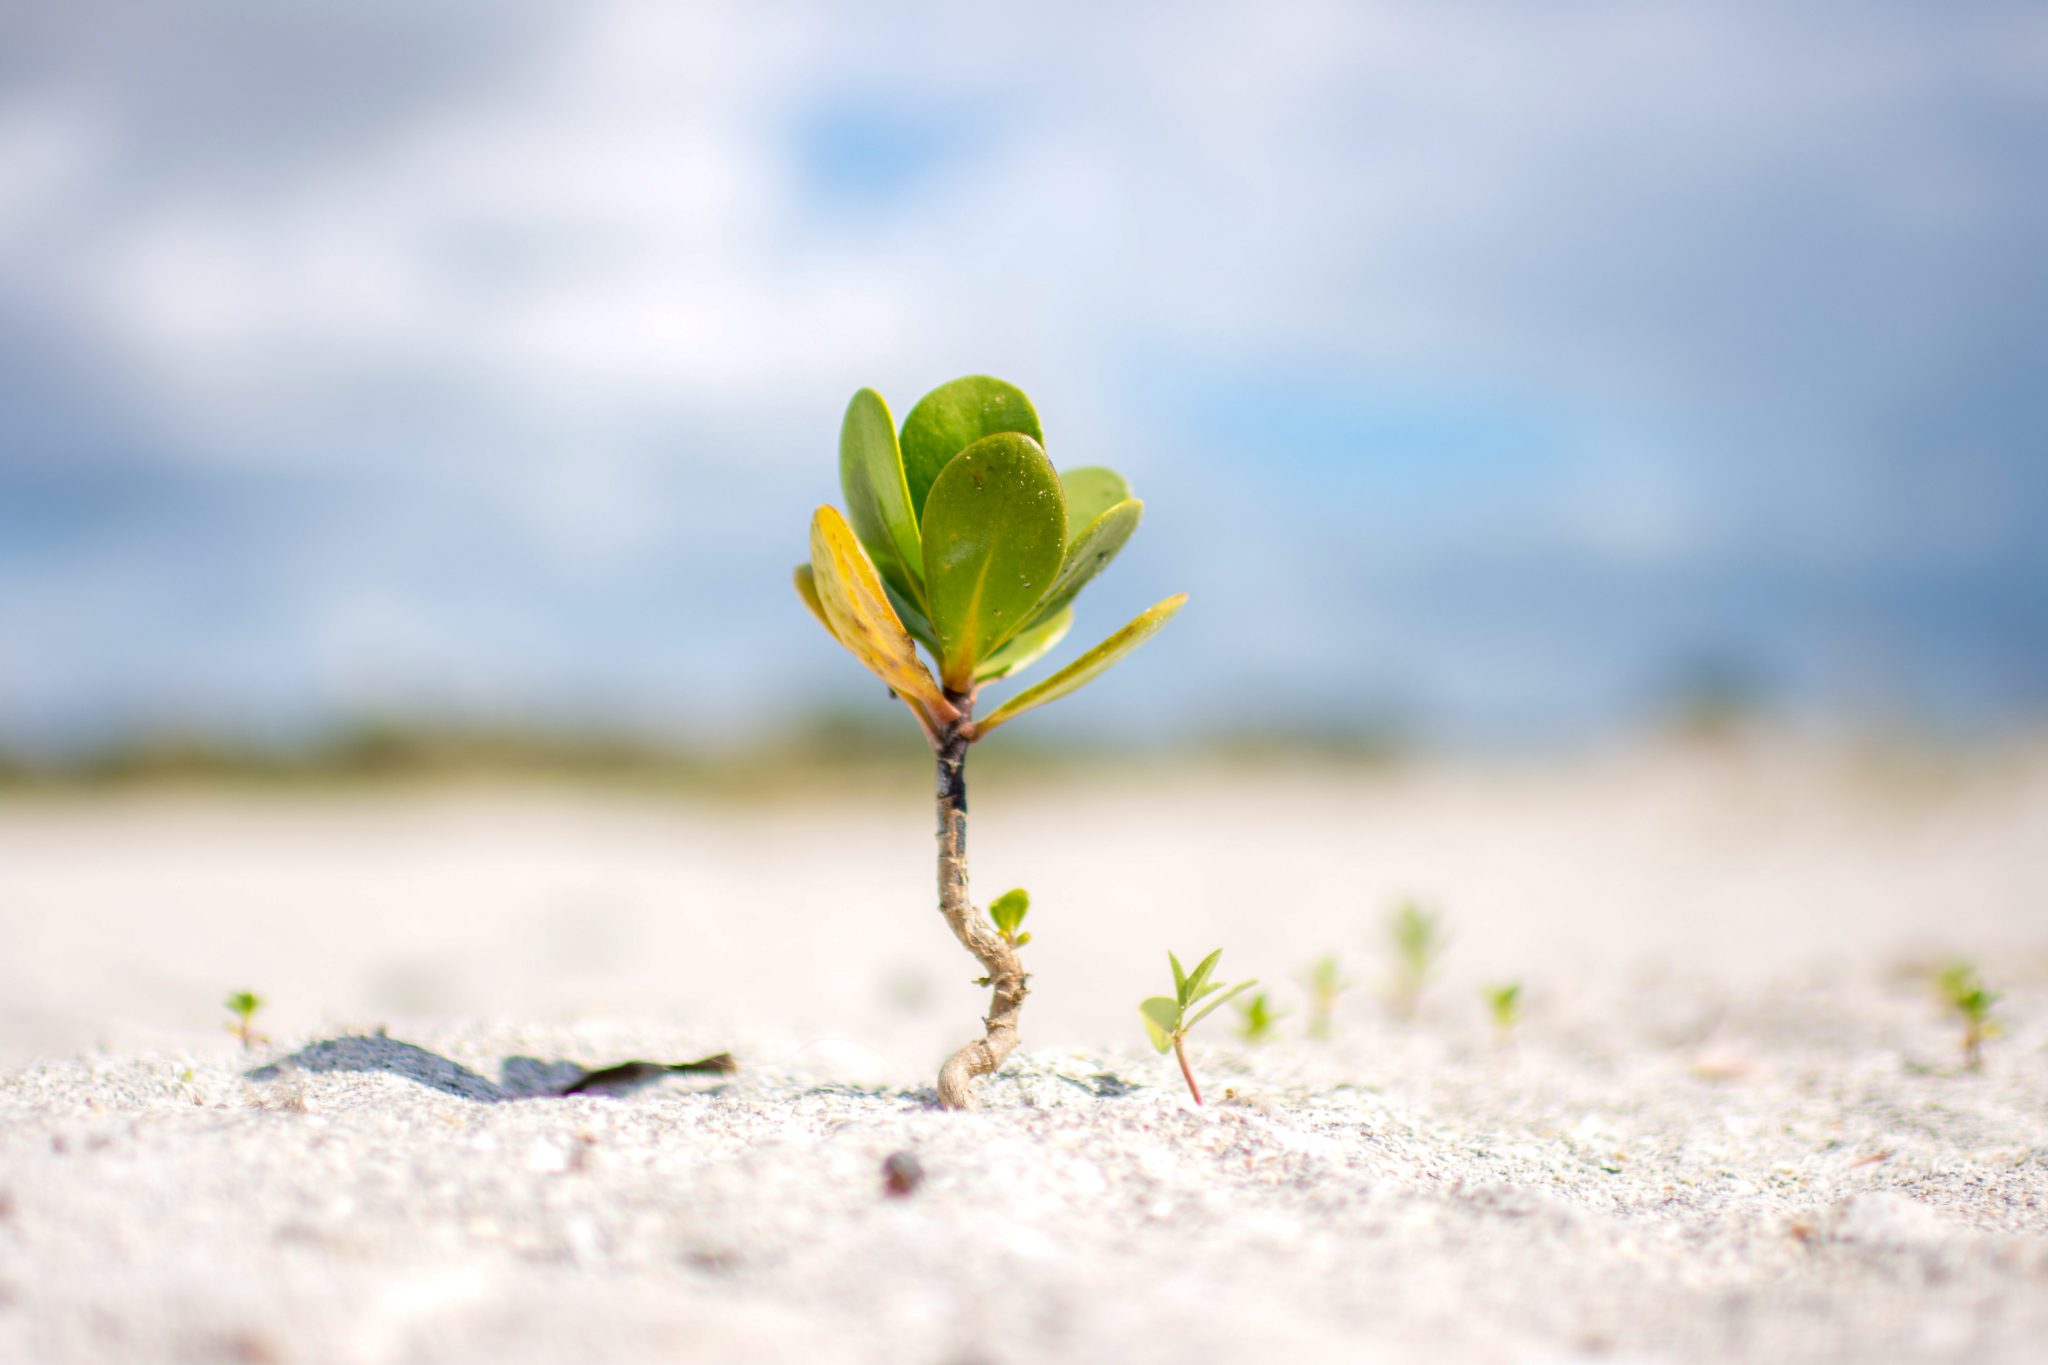 Lone sea grape plant sprouting out of a sandy beach